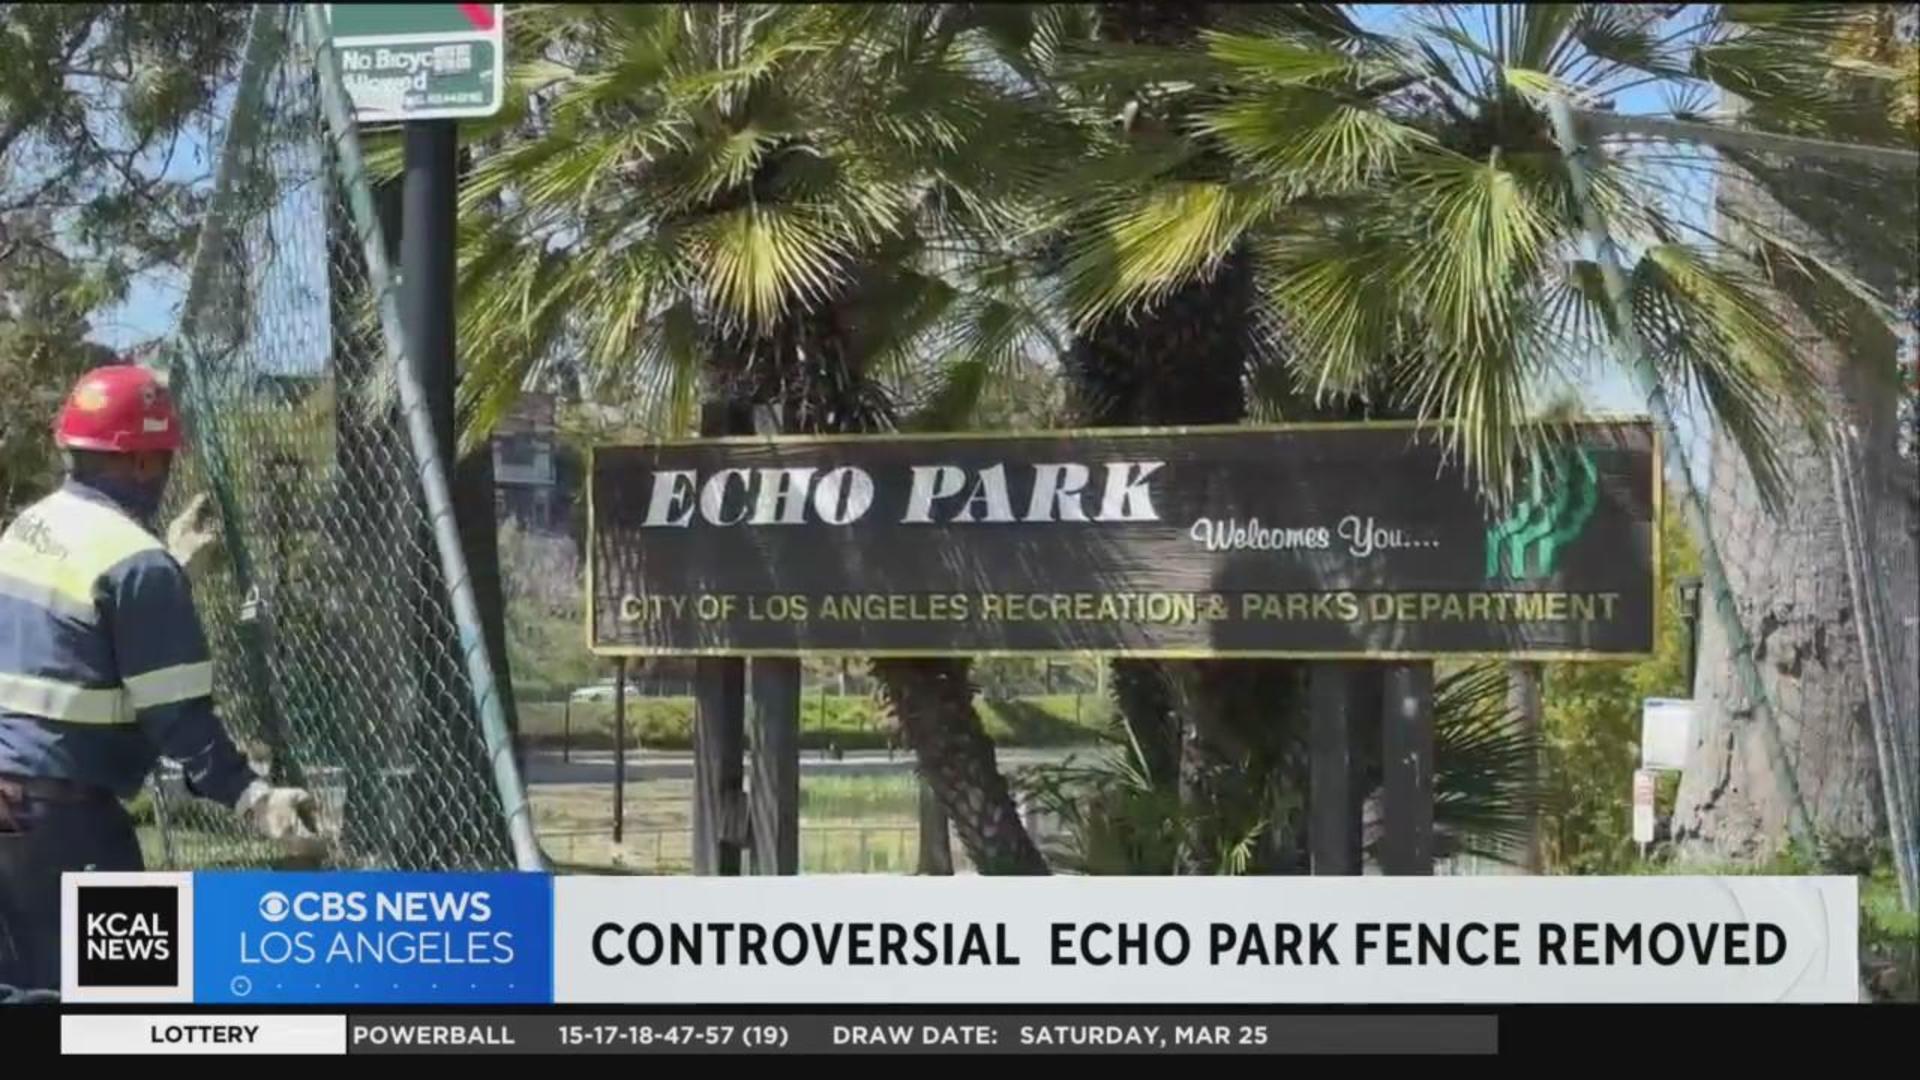 Echo Park Closed for Repairs? Sources Say the Park Will be Fenced